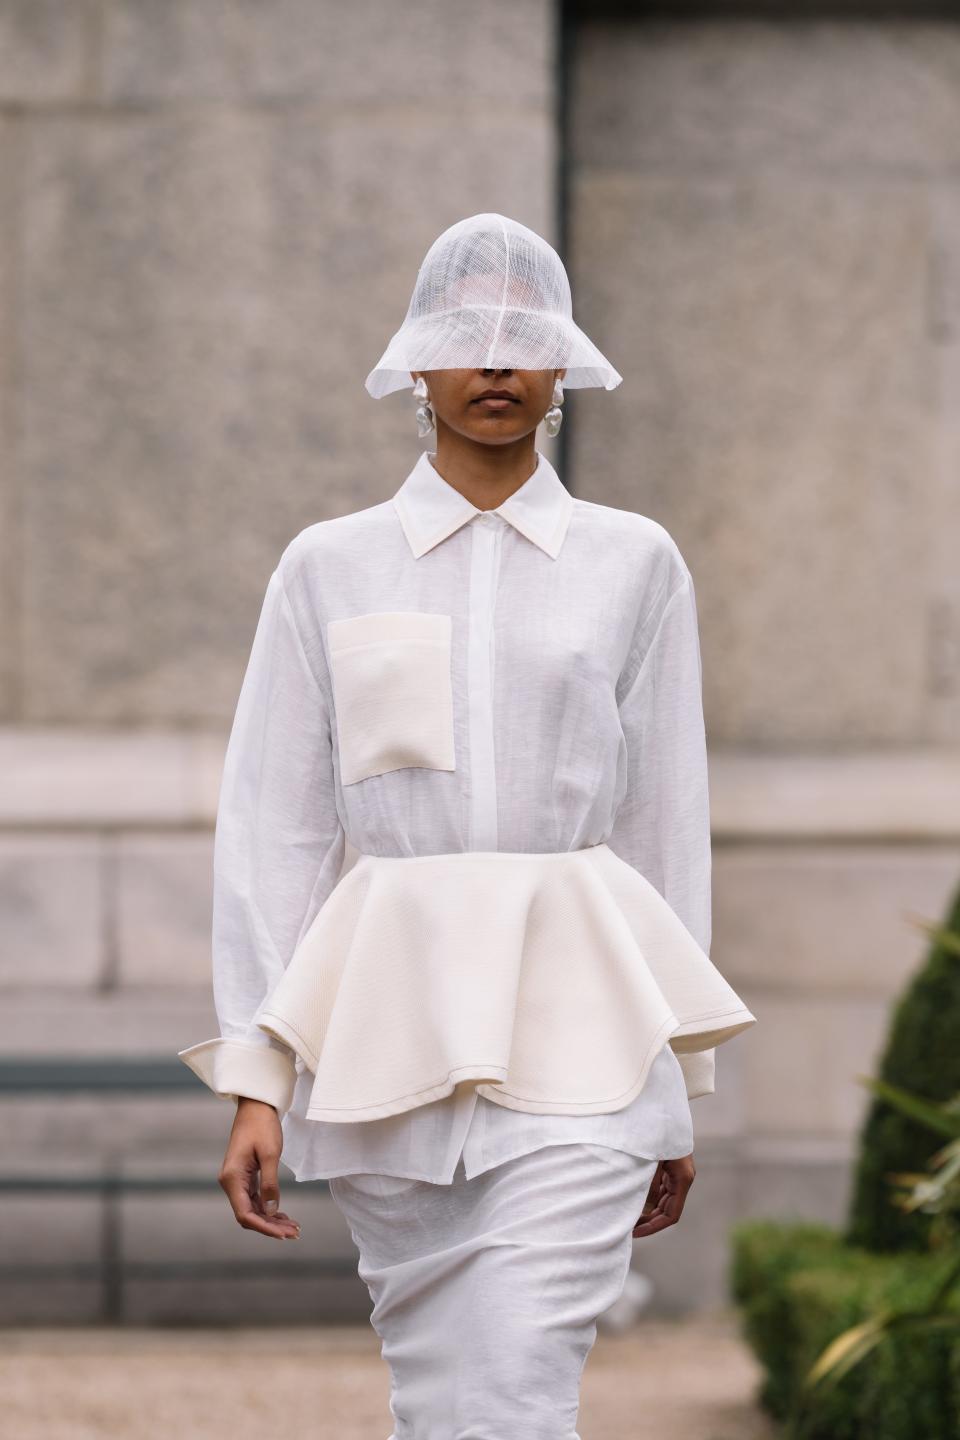 Model at the Mark Kenly Domino Tan wearing a white peplum outfit and bucket hat covering the eyes